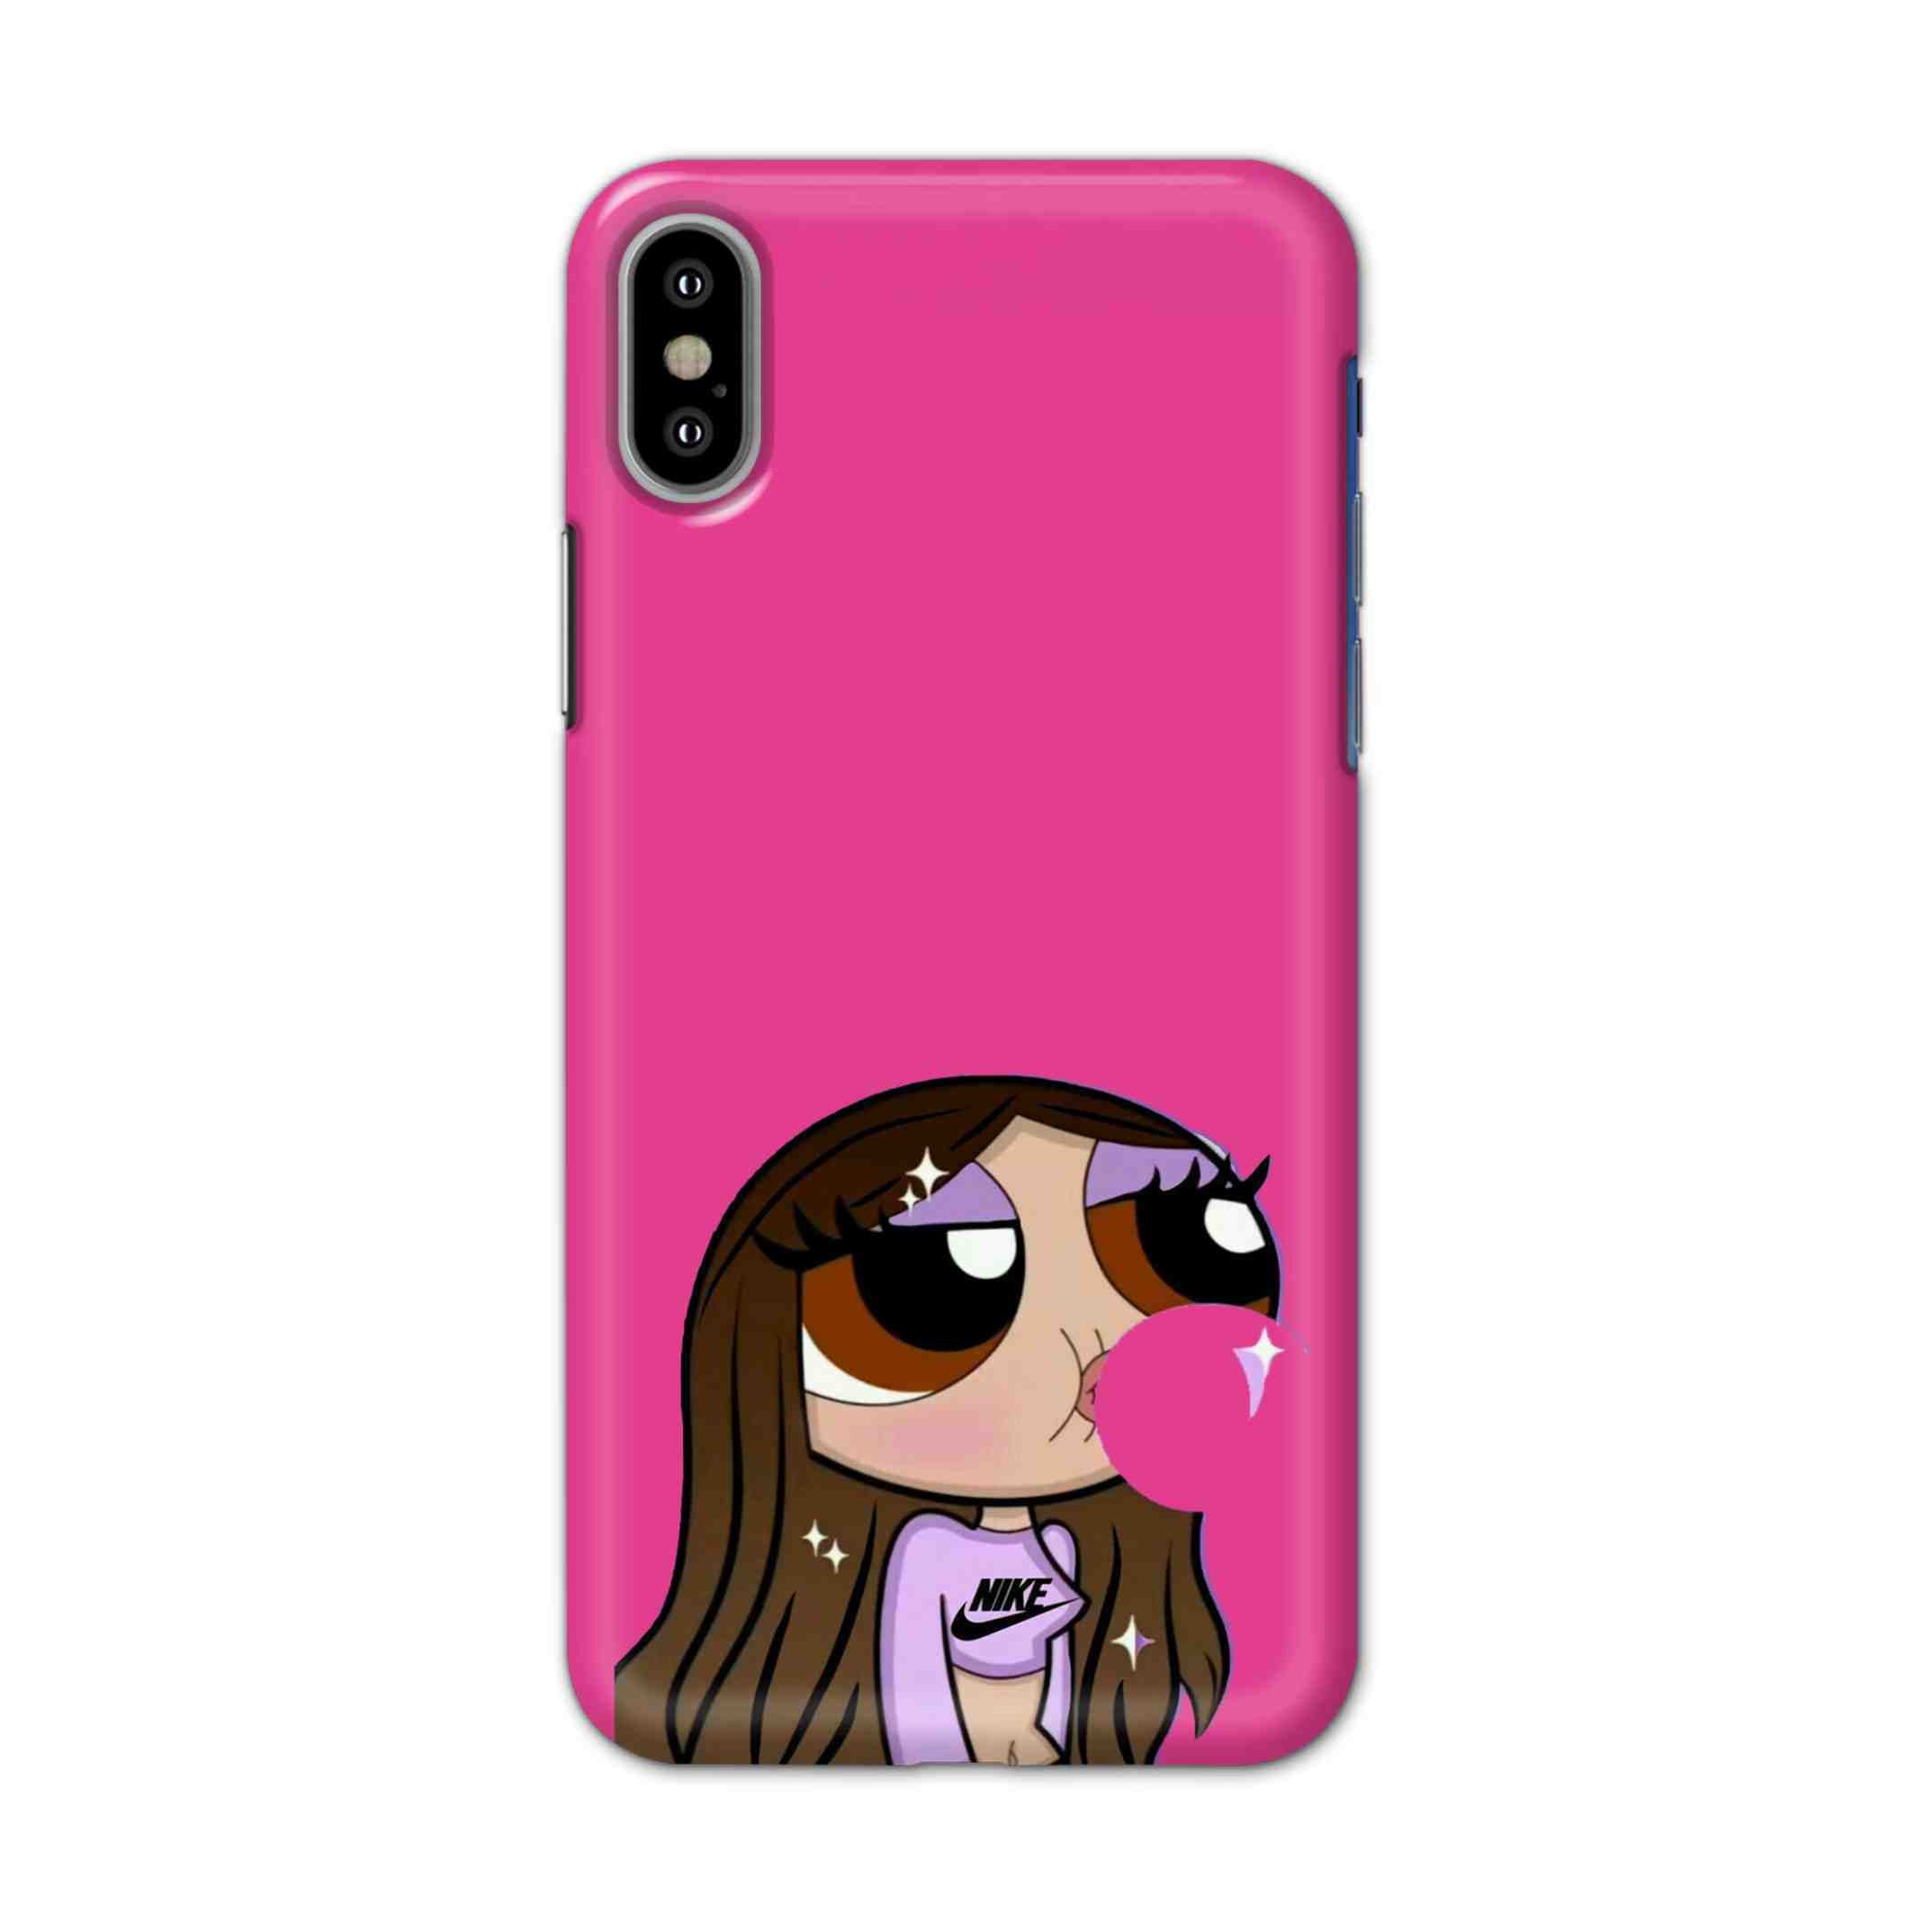 Buy Bubble Girl Hard Back Mobile Phone Case/Cover For iPhone X Online